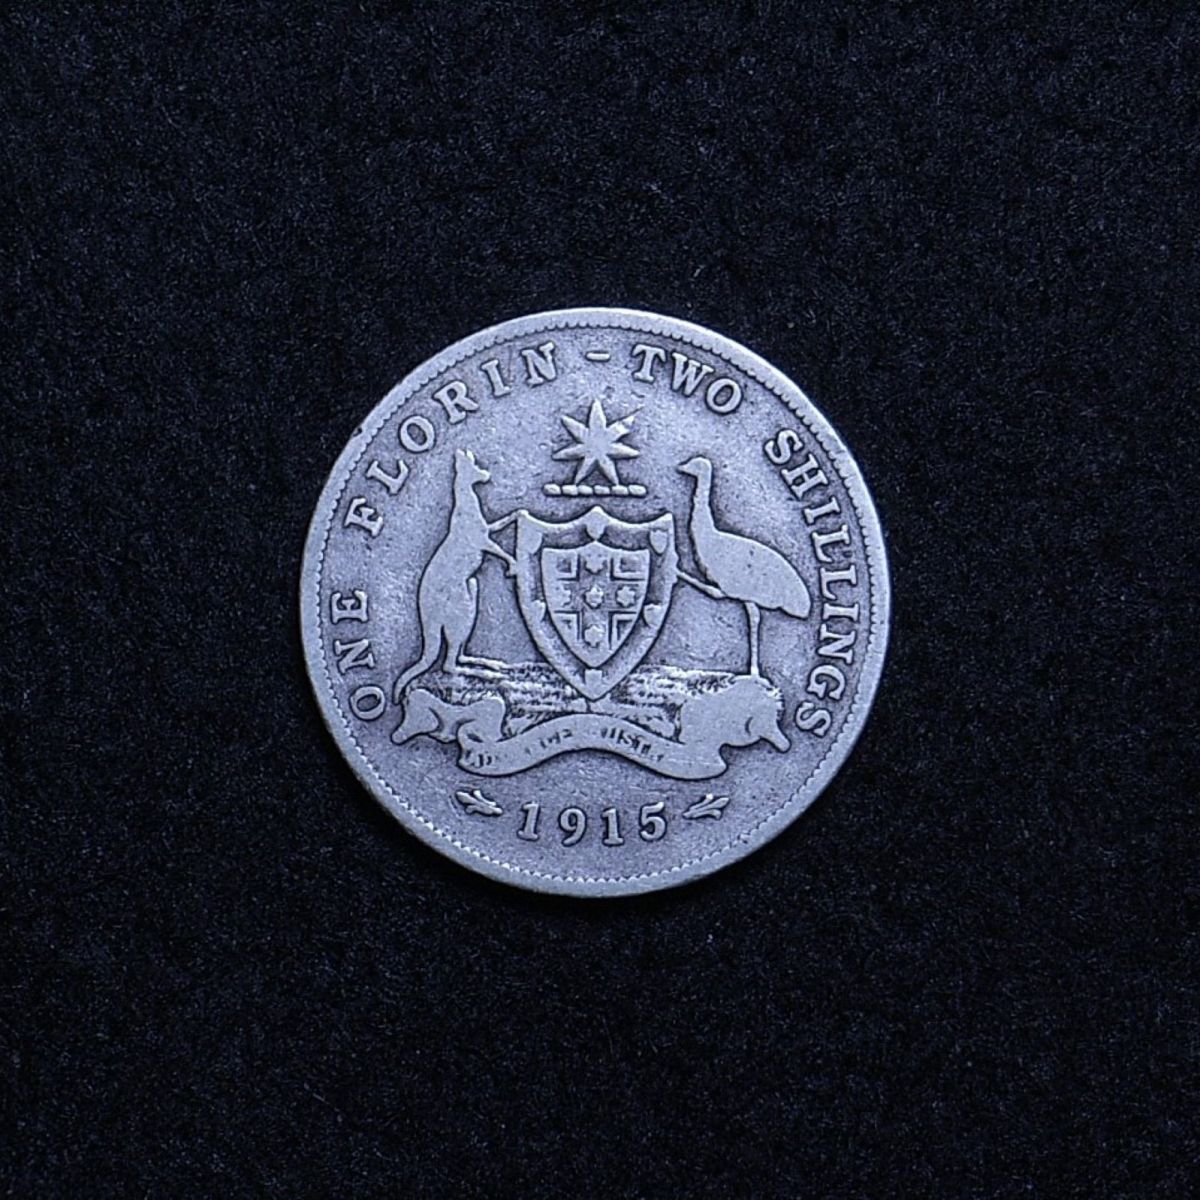 Aus Florin 1915 reverse showing overall appearance